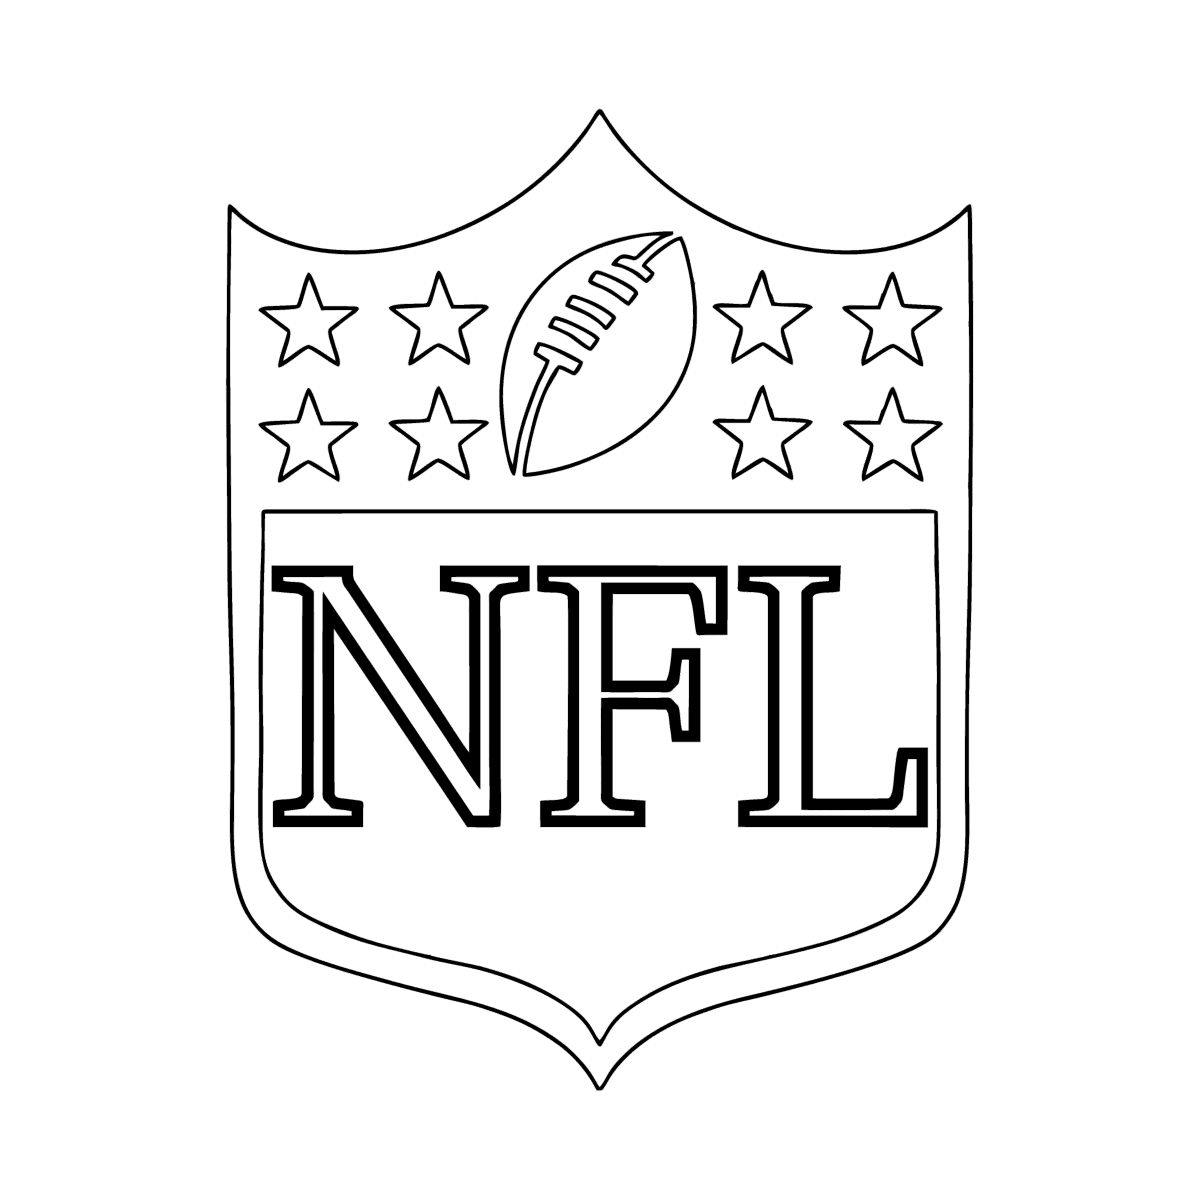 NFL Logo сoloring page ♥ Online and Print for Free!